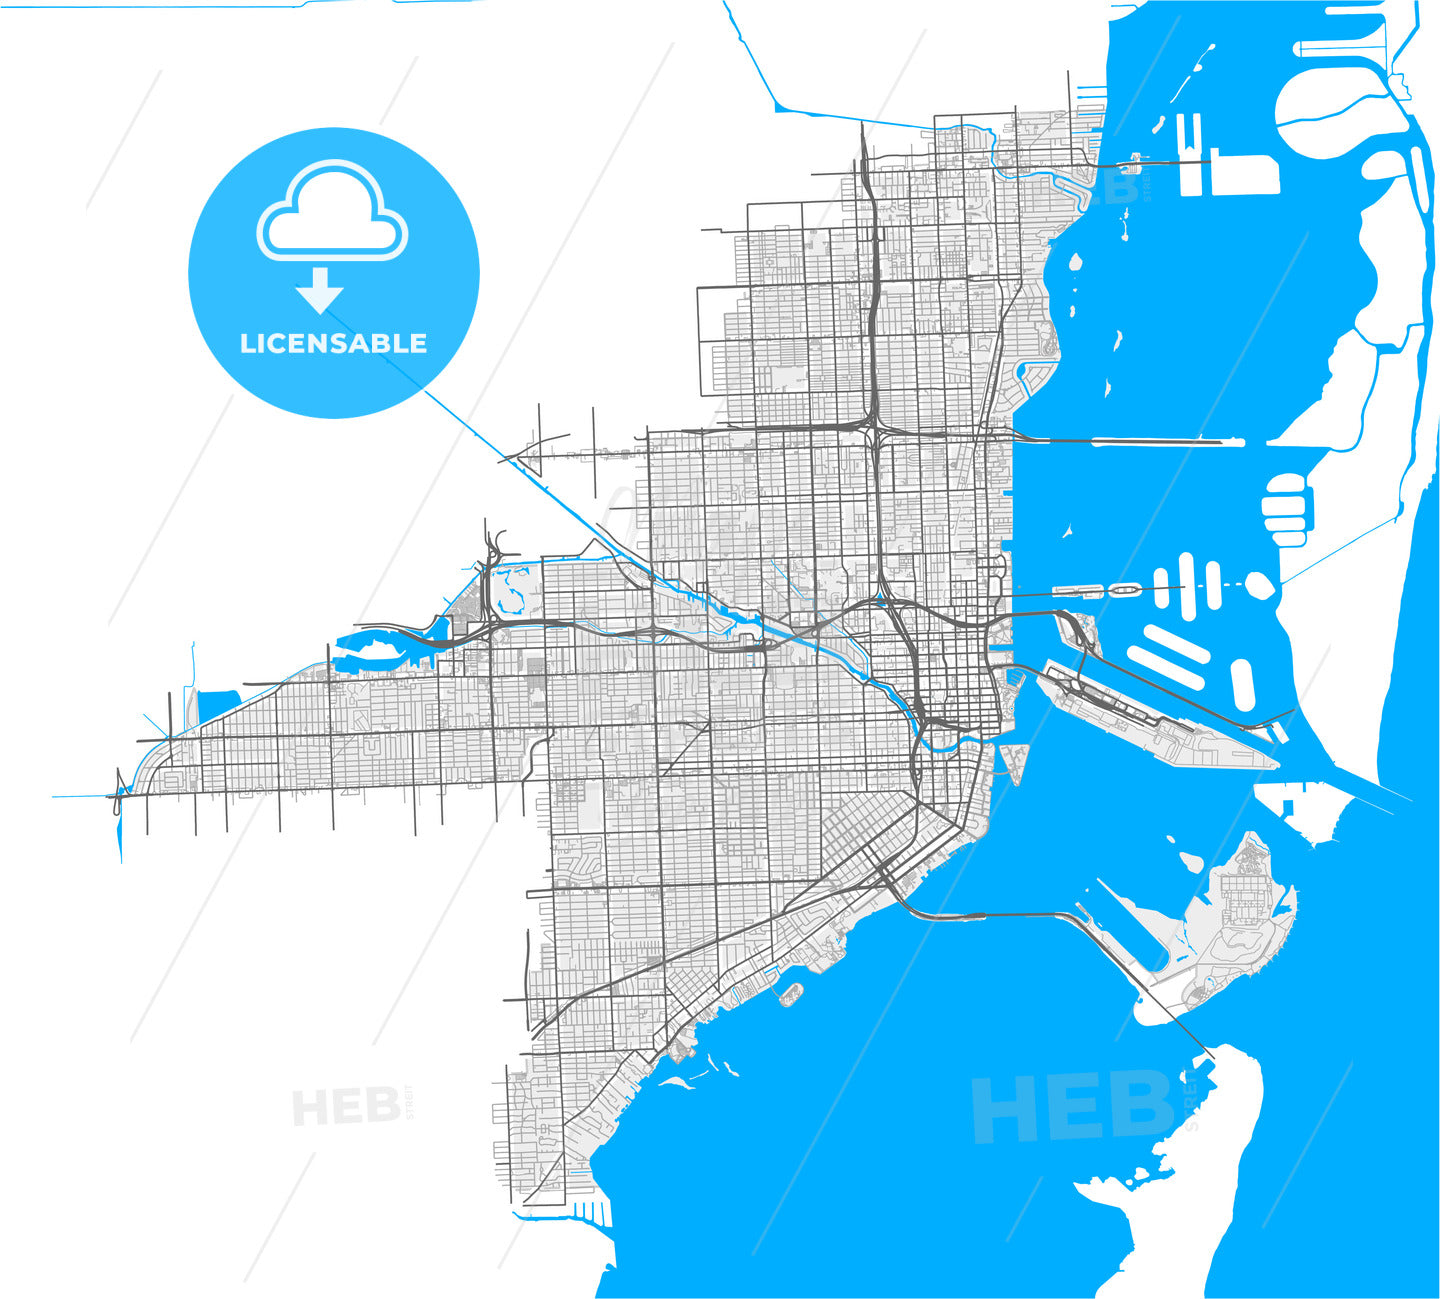 Miami, Florida, United States, high quality vector map